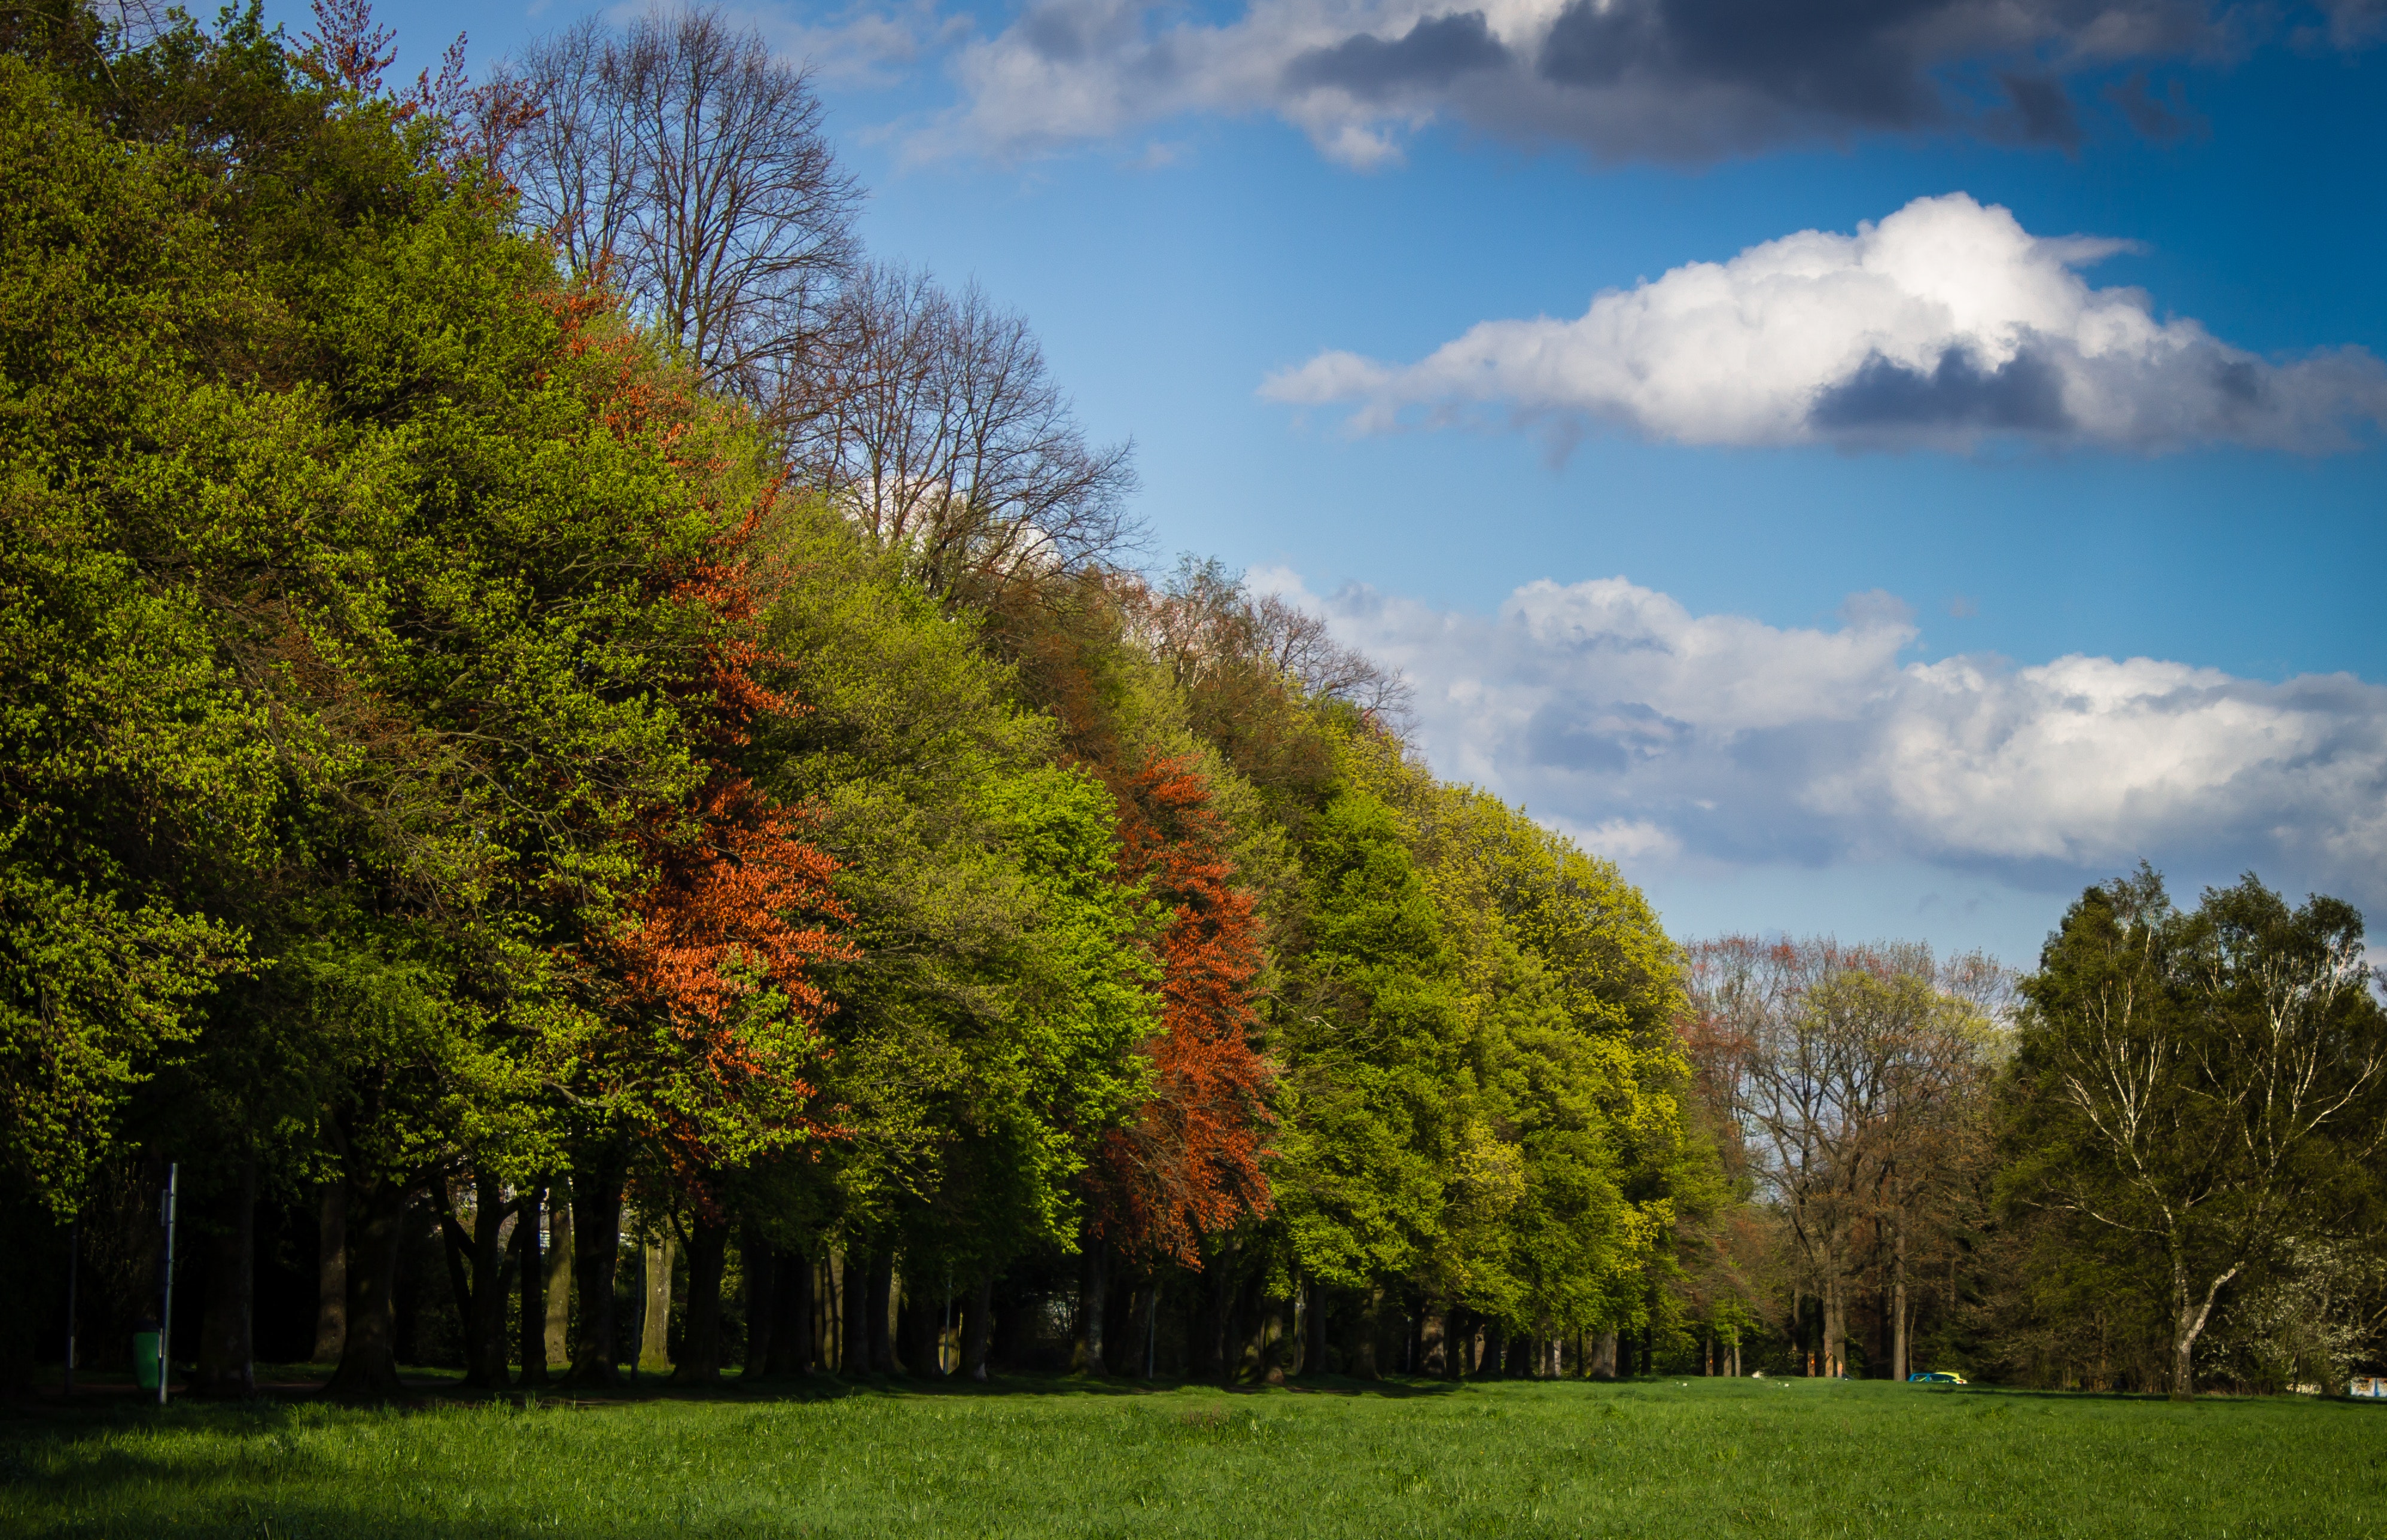 Green and red tress under blue sky and white clouds during daytime photo